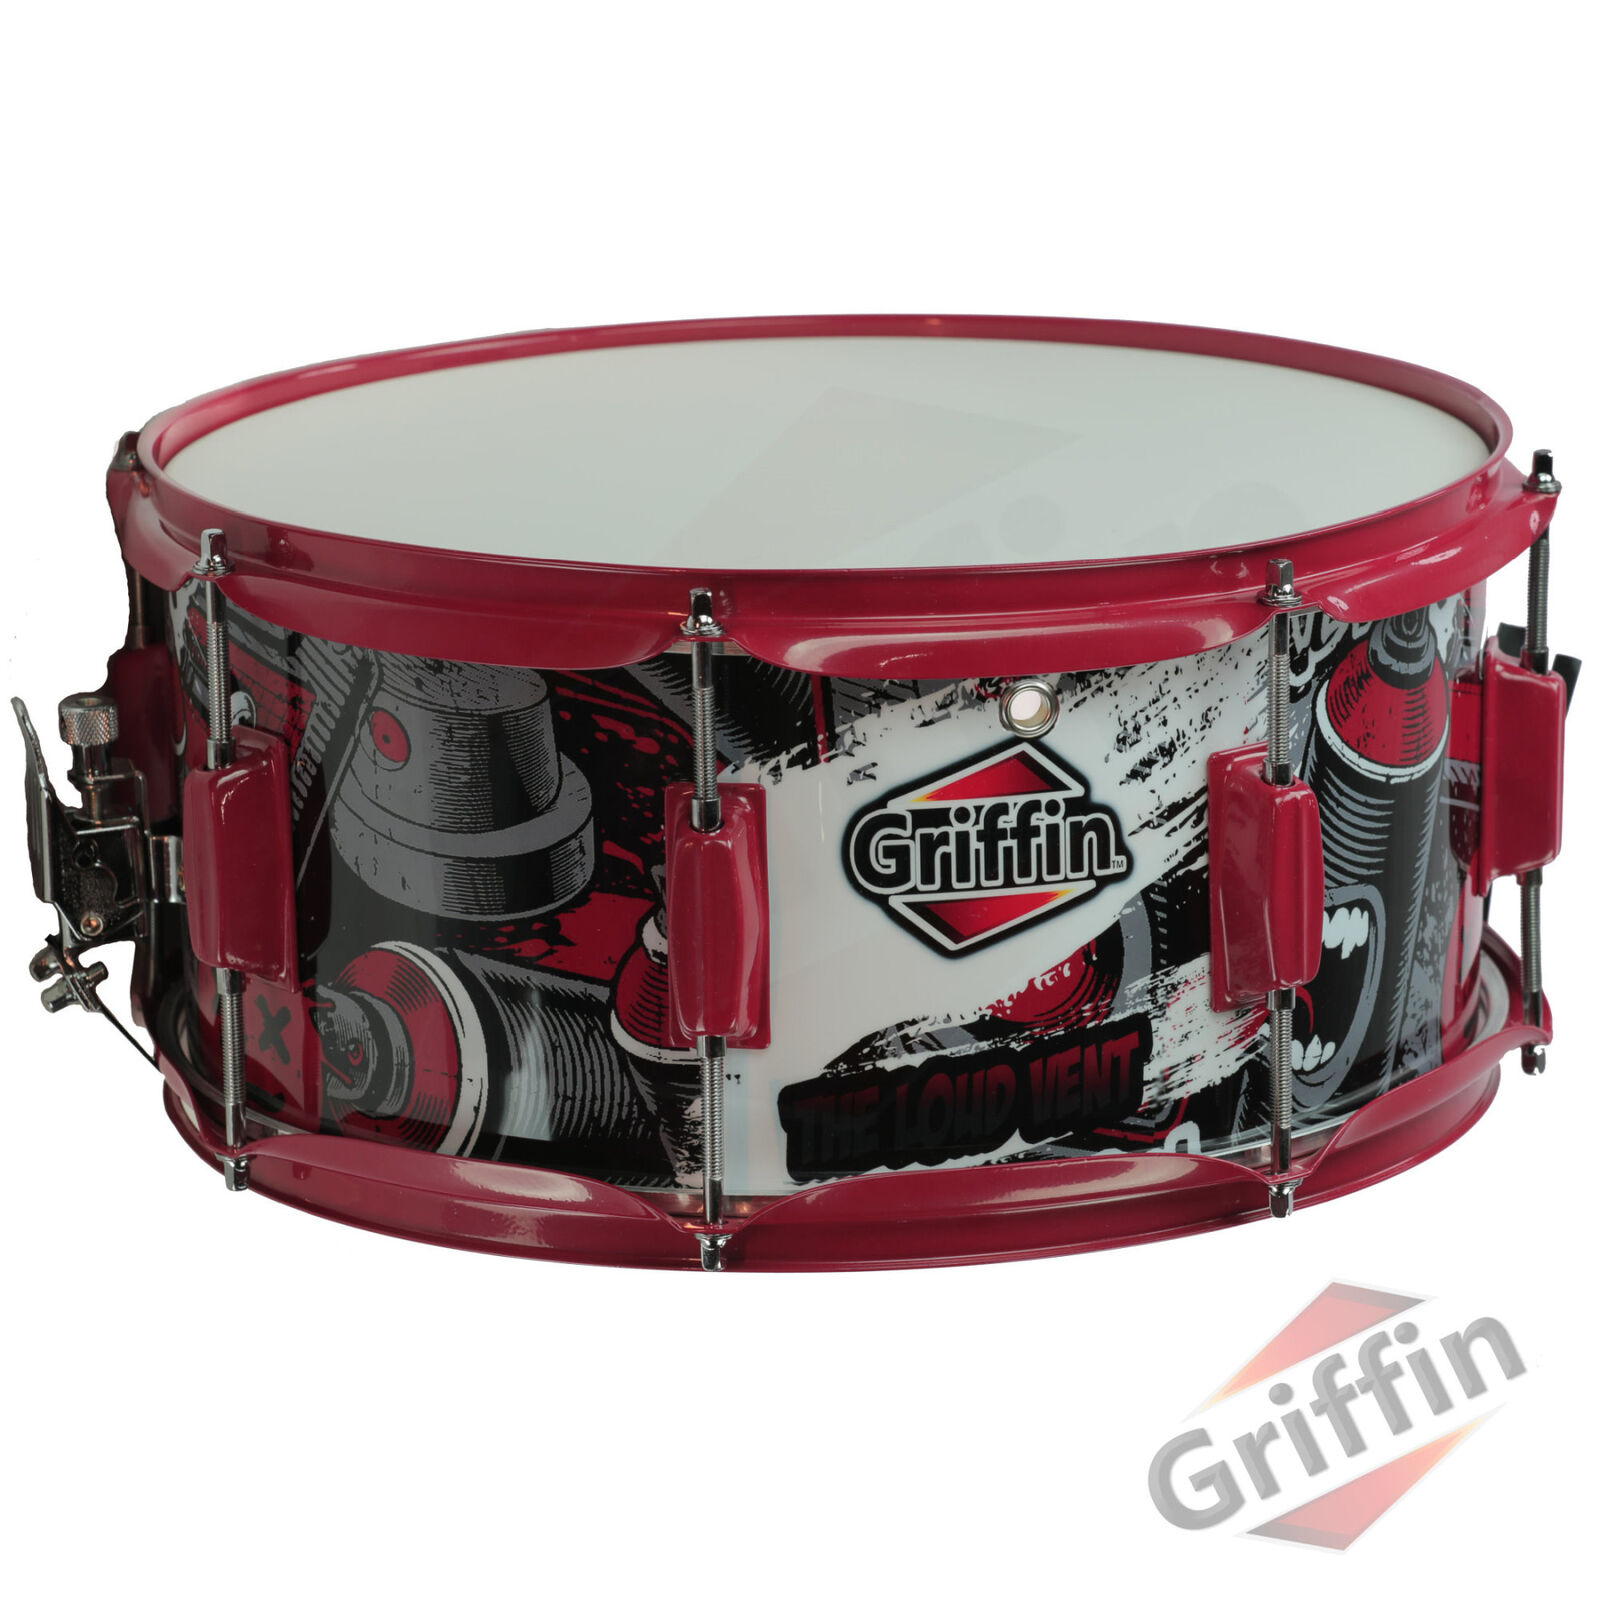 GRIFFIN Snare Drum Birch Wood Shell 14×6.5 Percussion Music Acoustic Kit Set Key 1